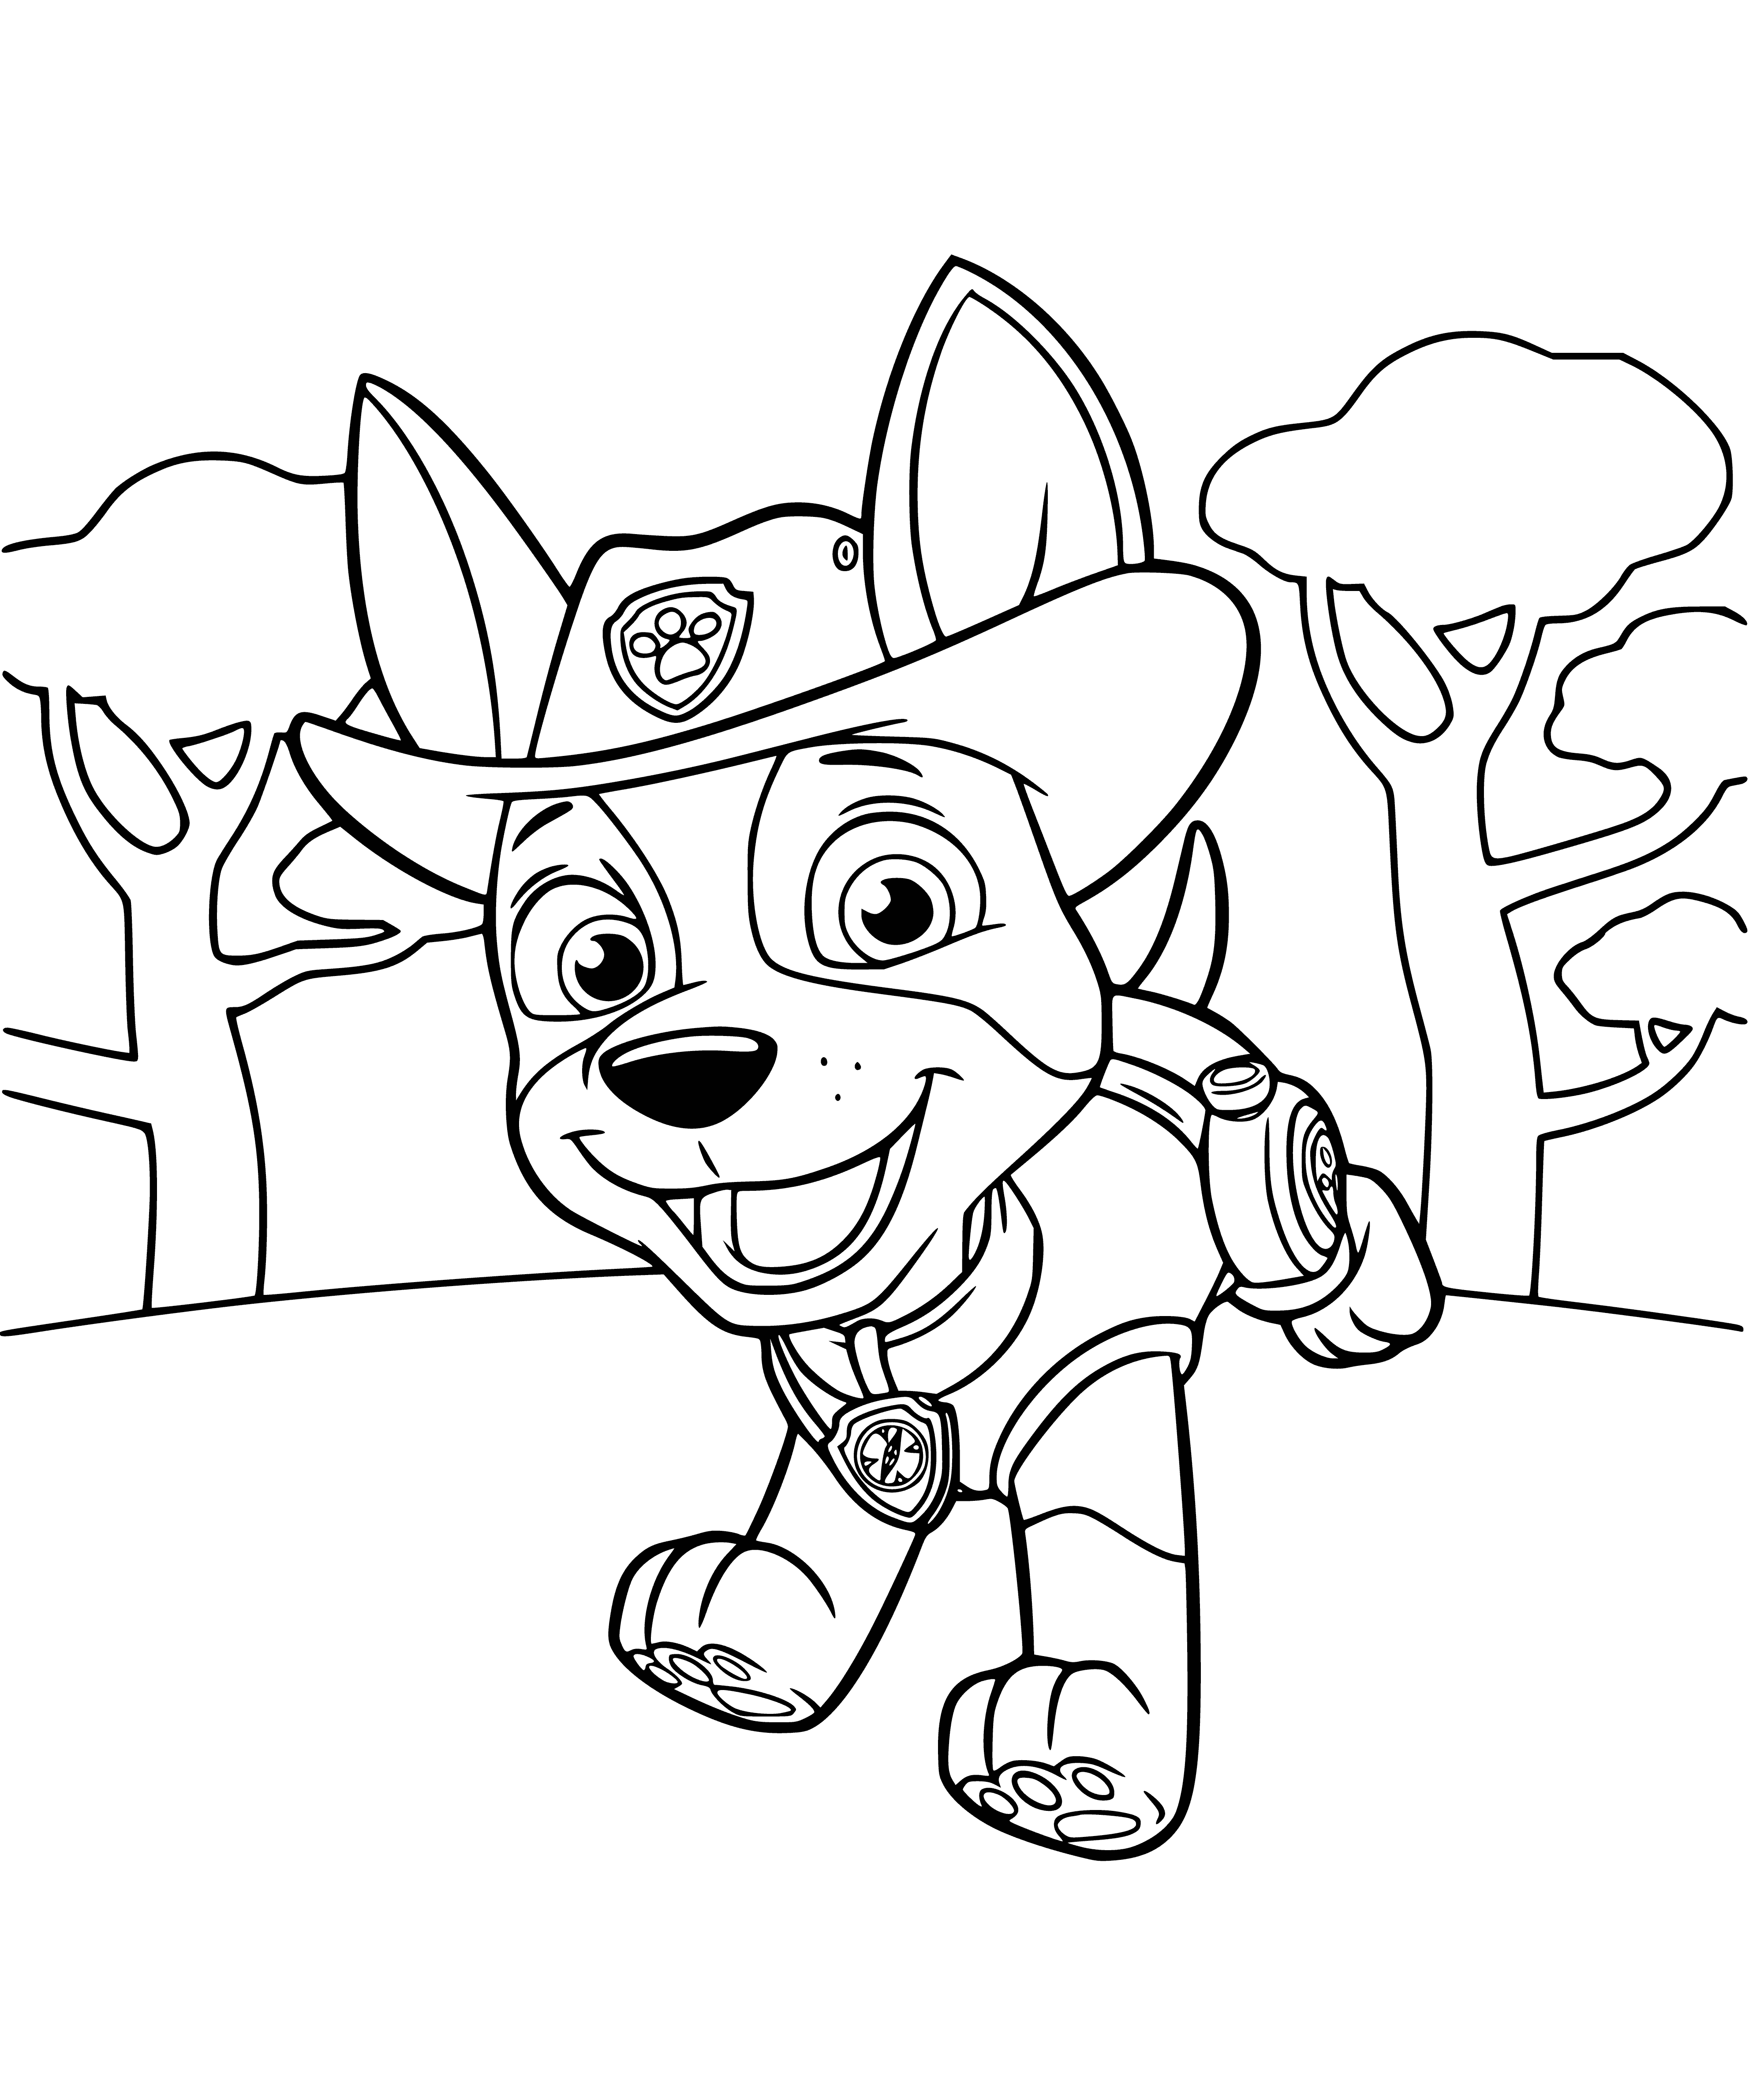 coloring page: Adorable pup playing with frisbee, tongue out, wearing a bandana, looks so happy!